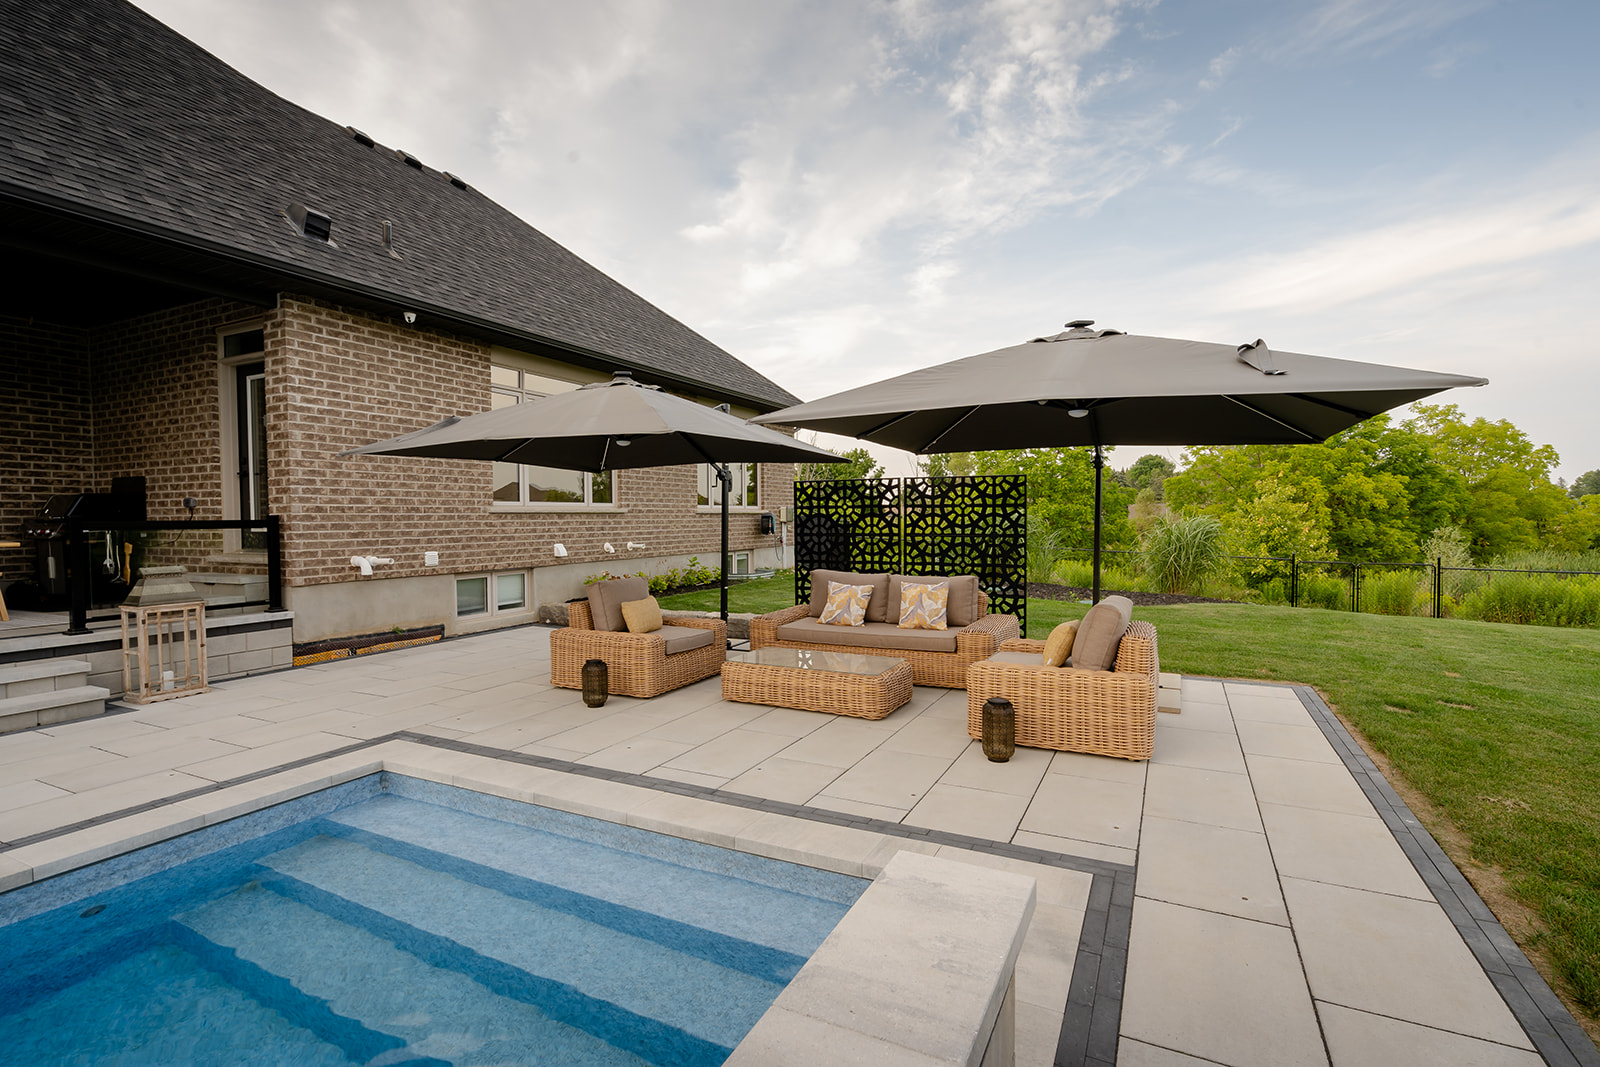 An outdoor seating area with both umbrellas open and an inground pool in front.